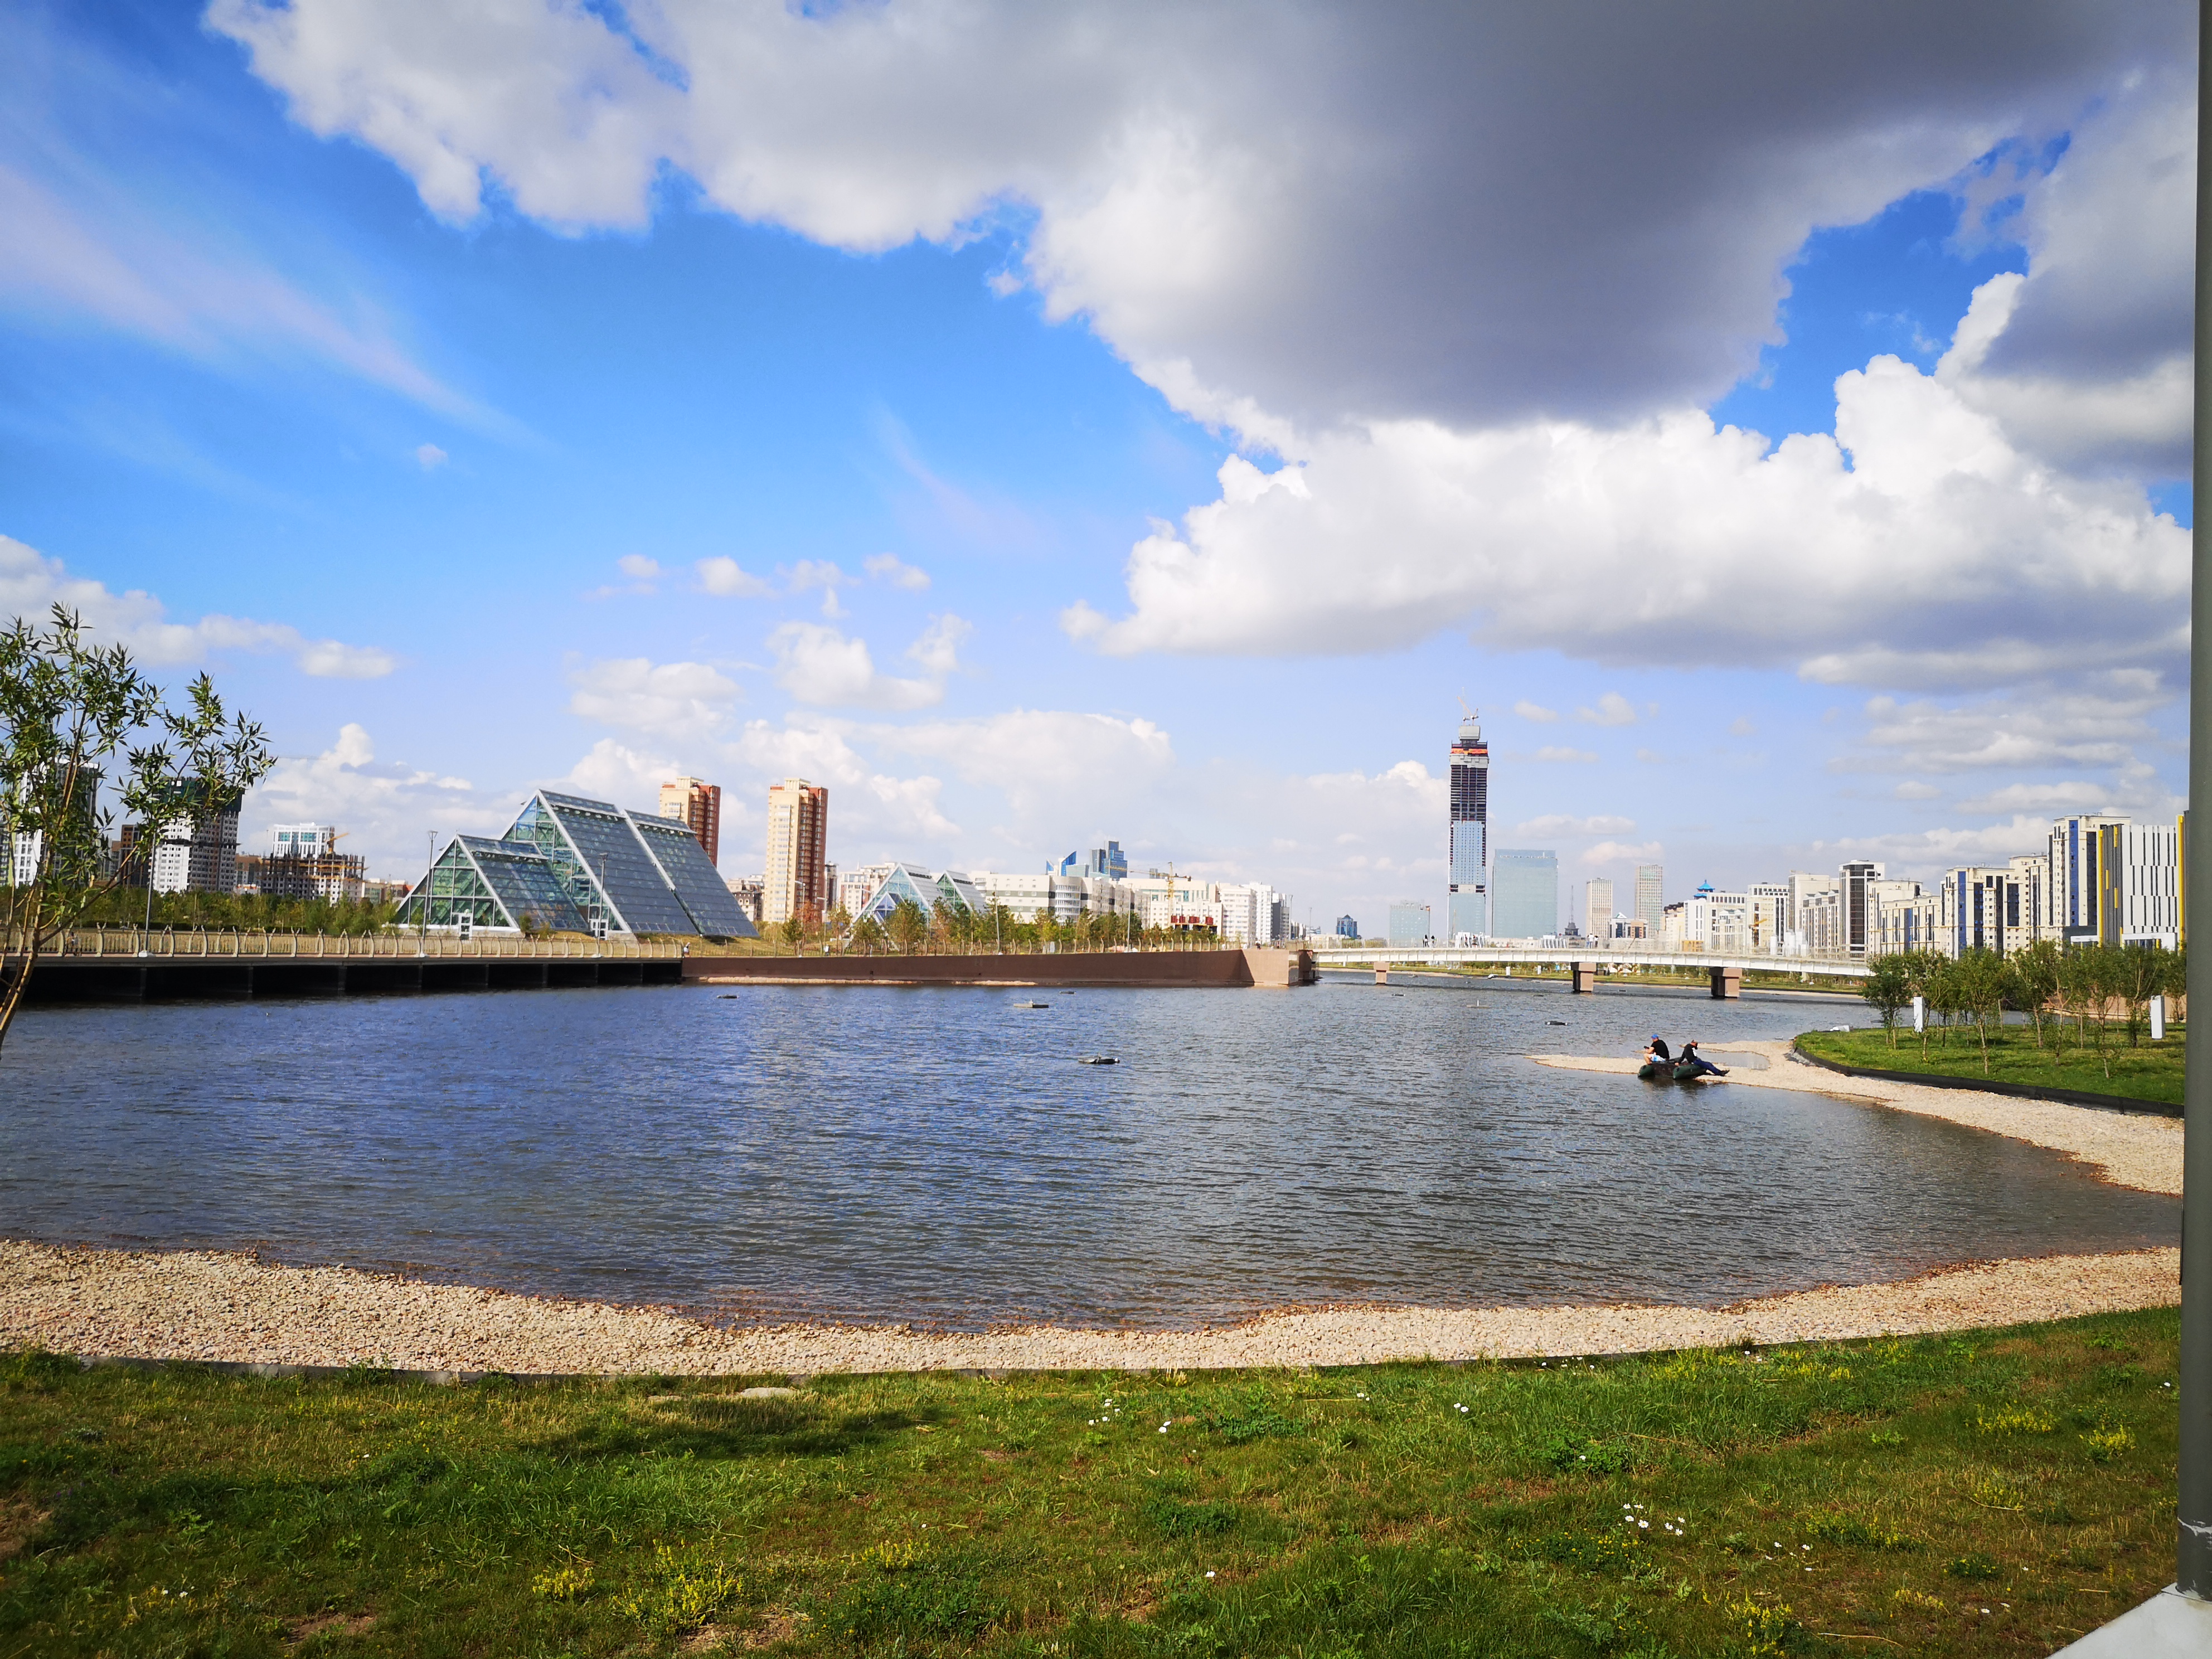 Nur-Sultan, Almaty among 10 most popular tourist cities in ...